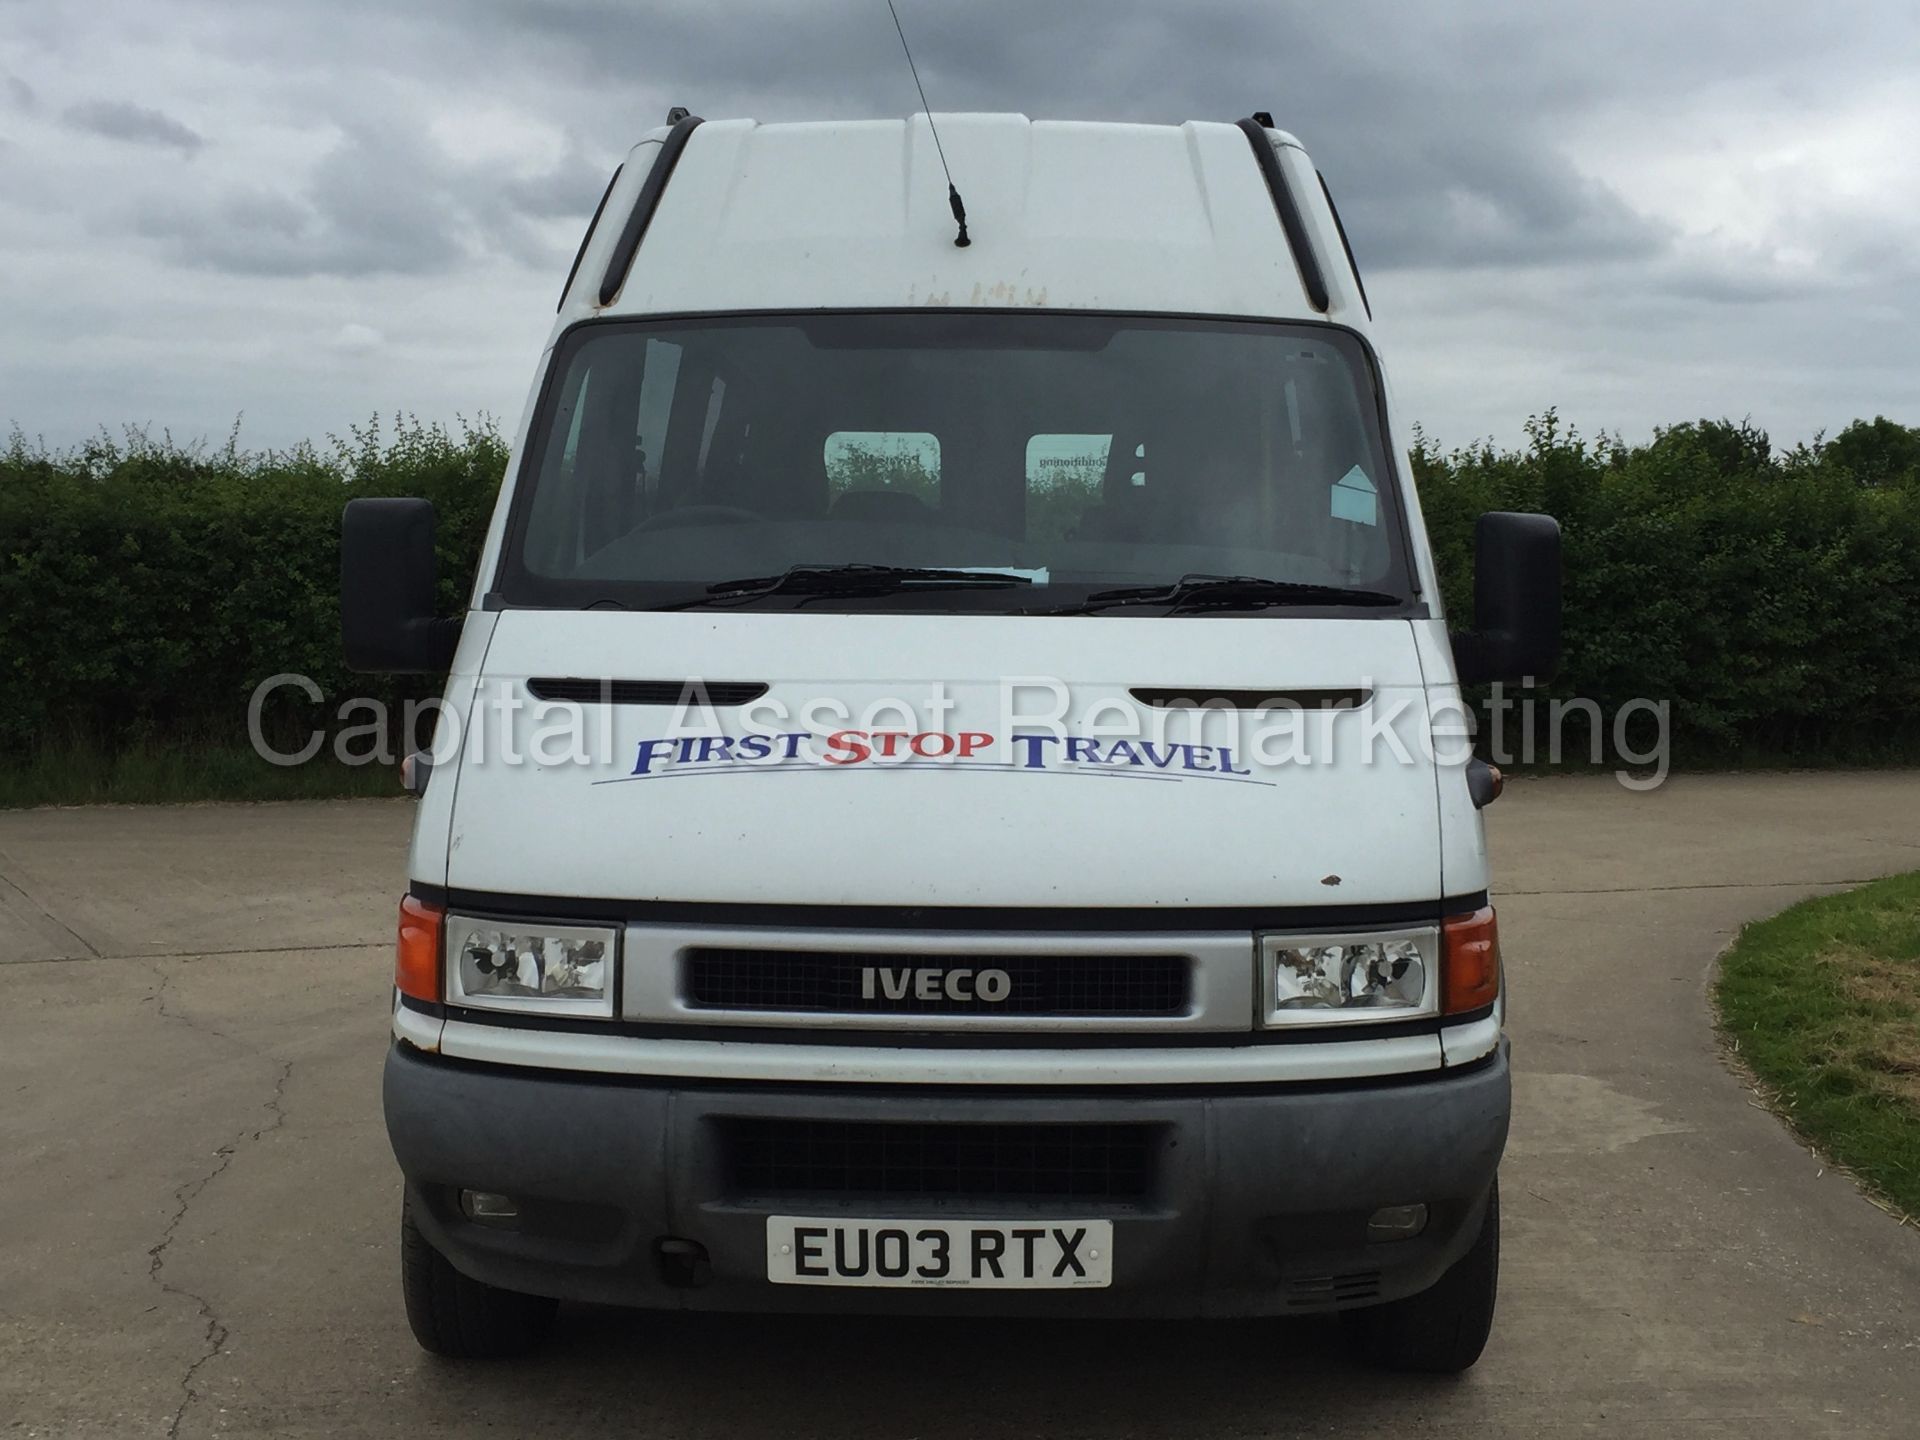 (on sale) IVECO DAILY 35S13 '14 SEATER MINI-BUS' (2003 - 03 REG) '2.3 DIESEL - 6 SPEED' (NO VAT) - Image 2 of 23